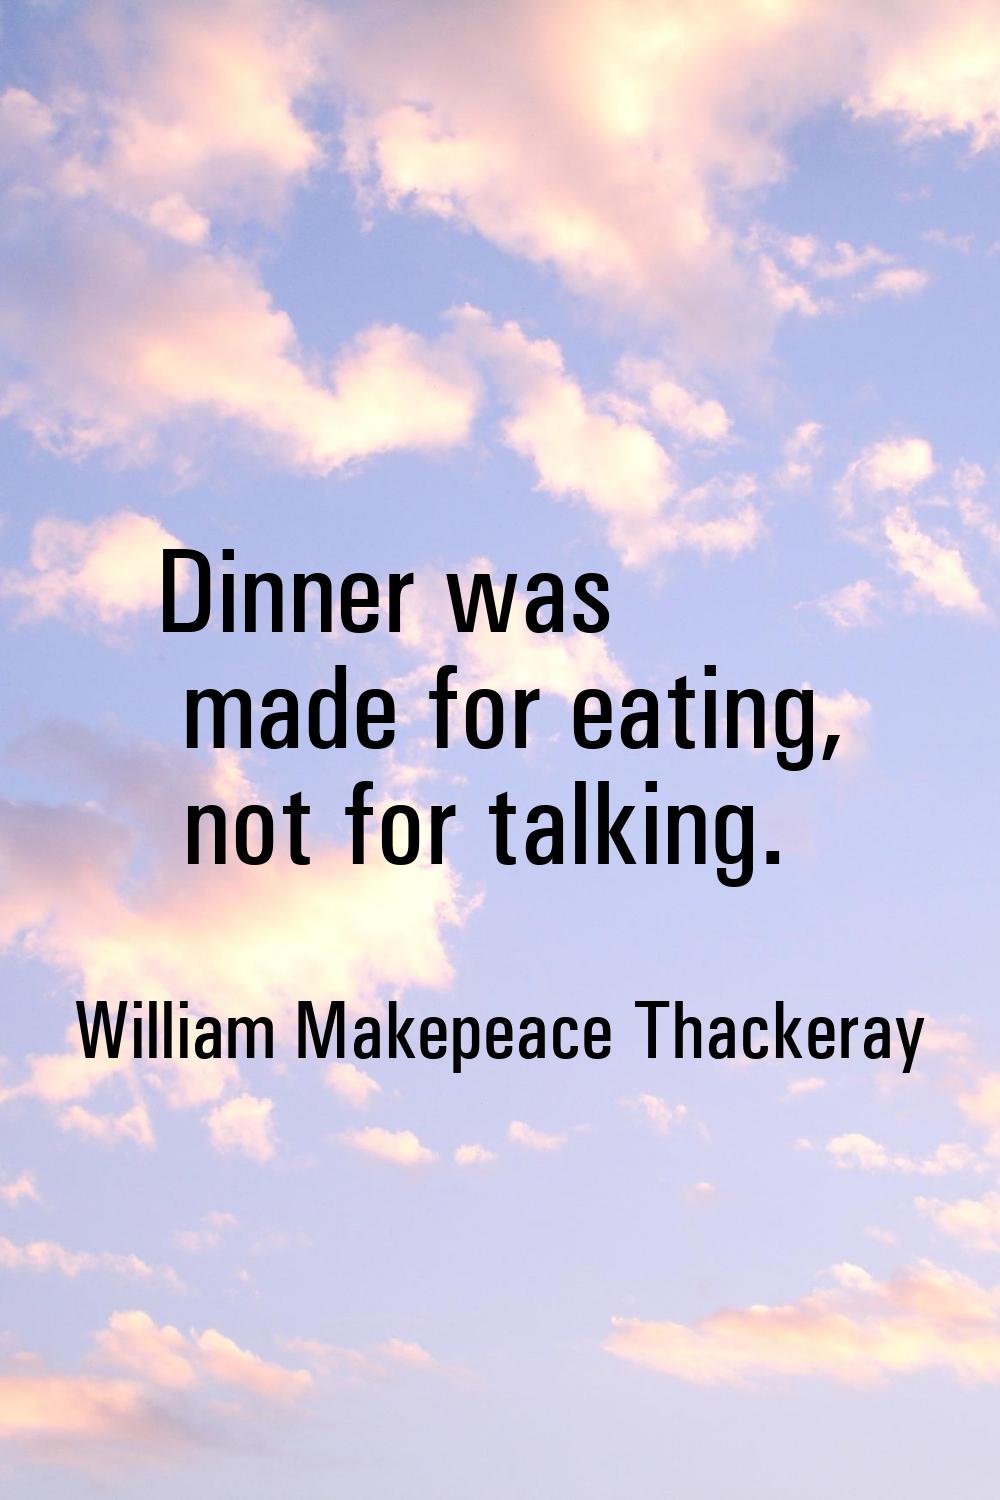 Dinner was made for eating, not for talking.